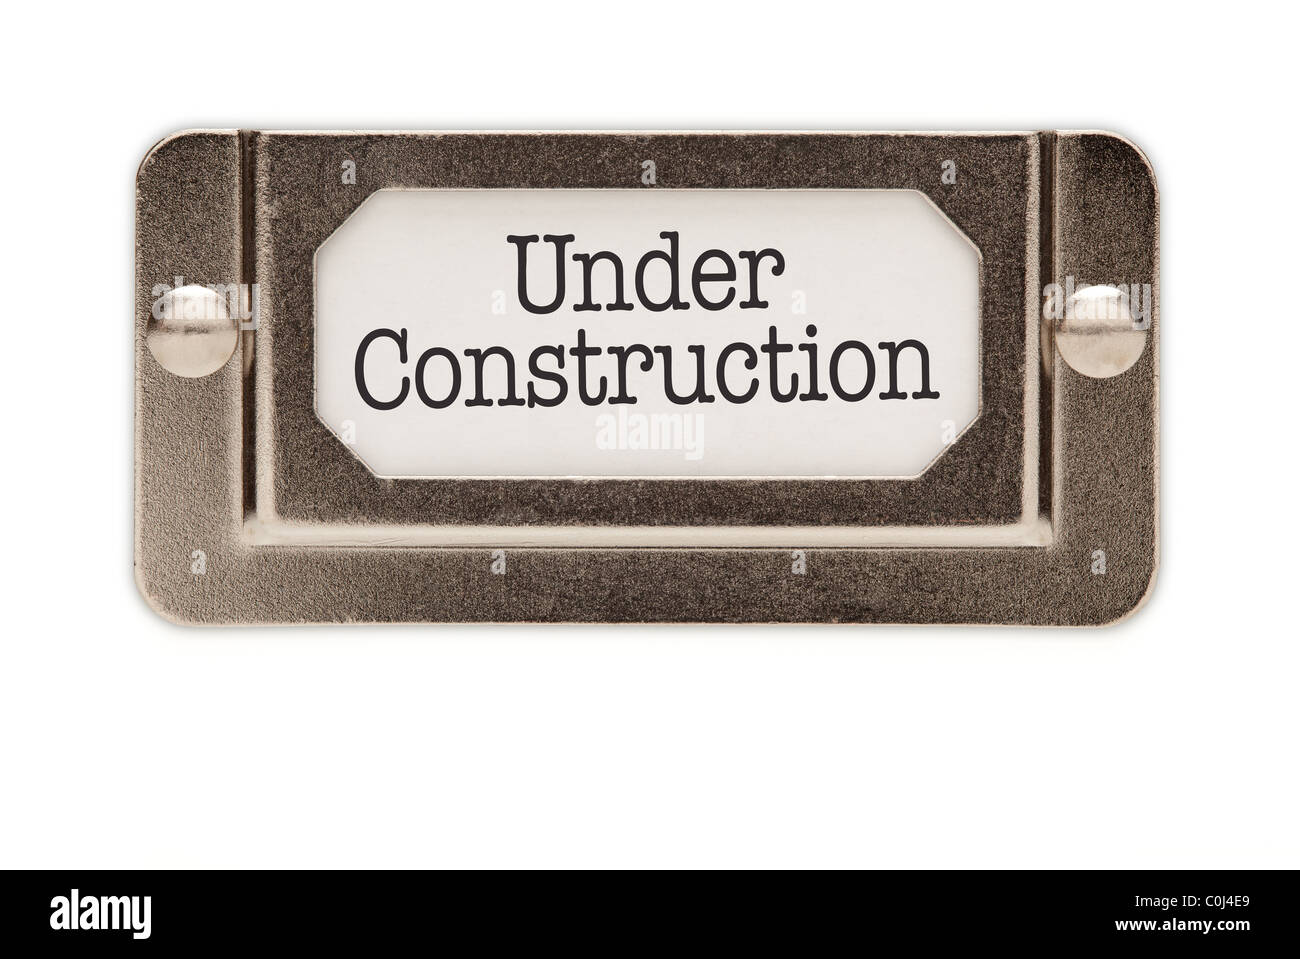 Under Construction File Drawer Label Isolated on a White Background. Stock Photo